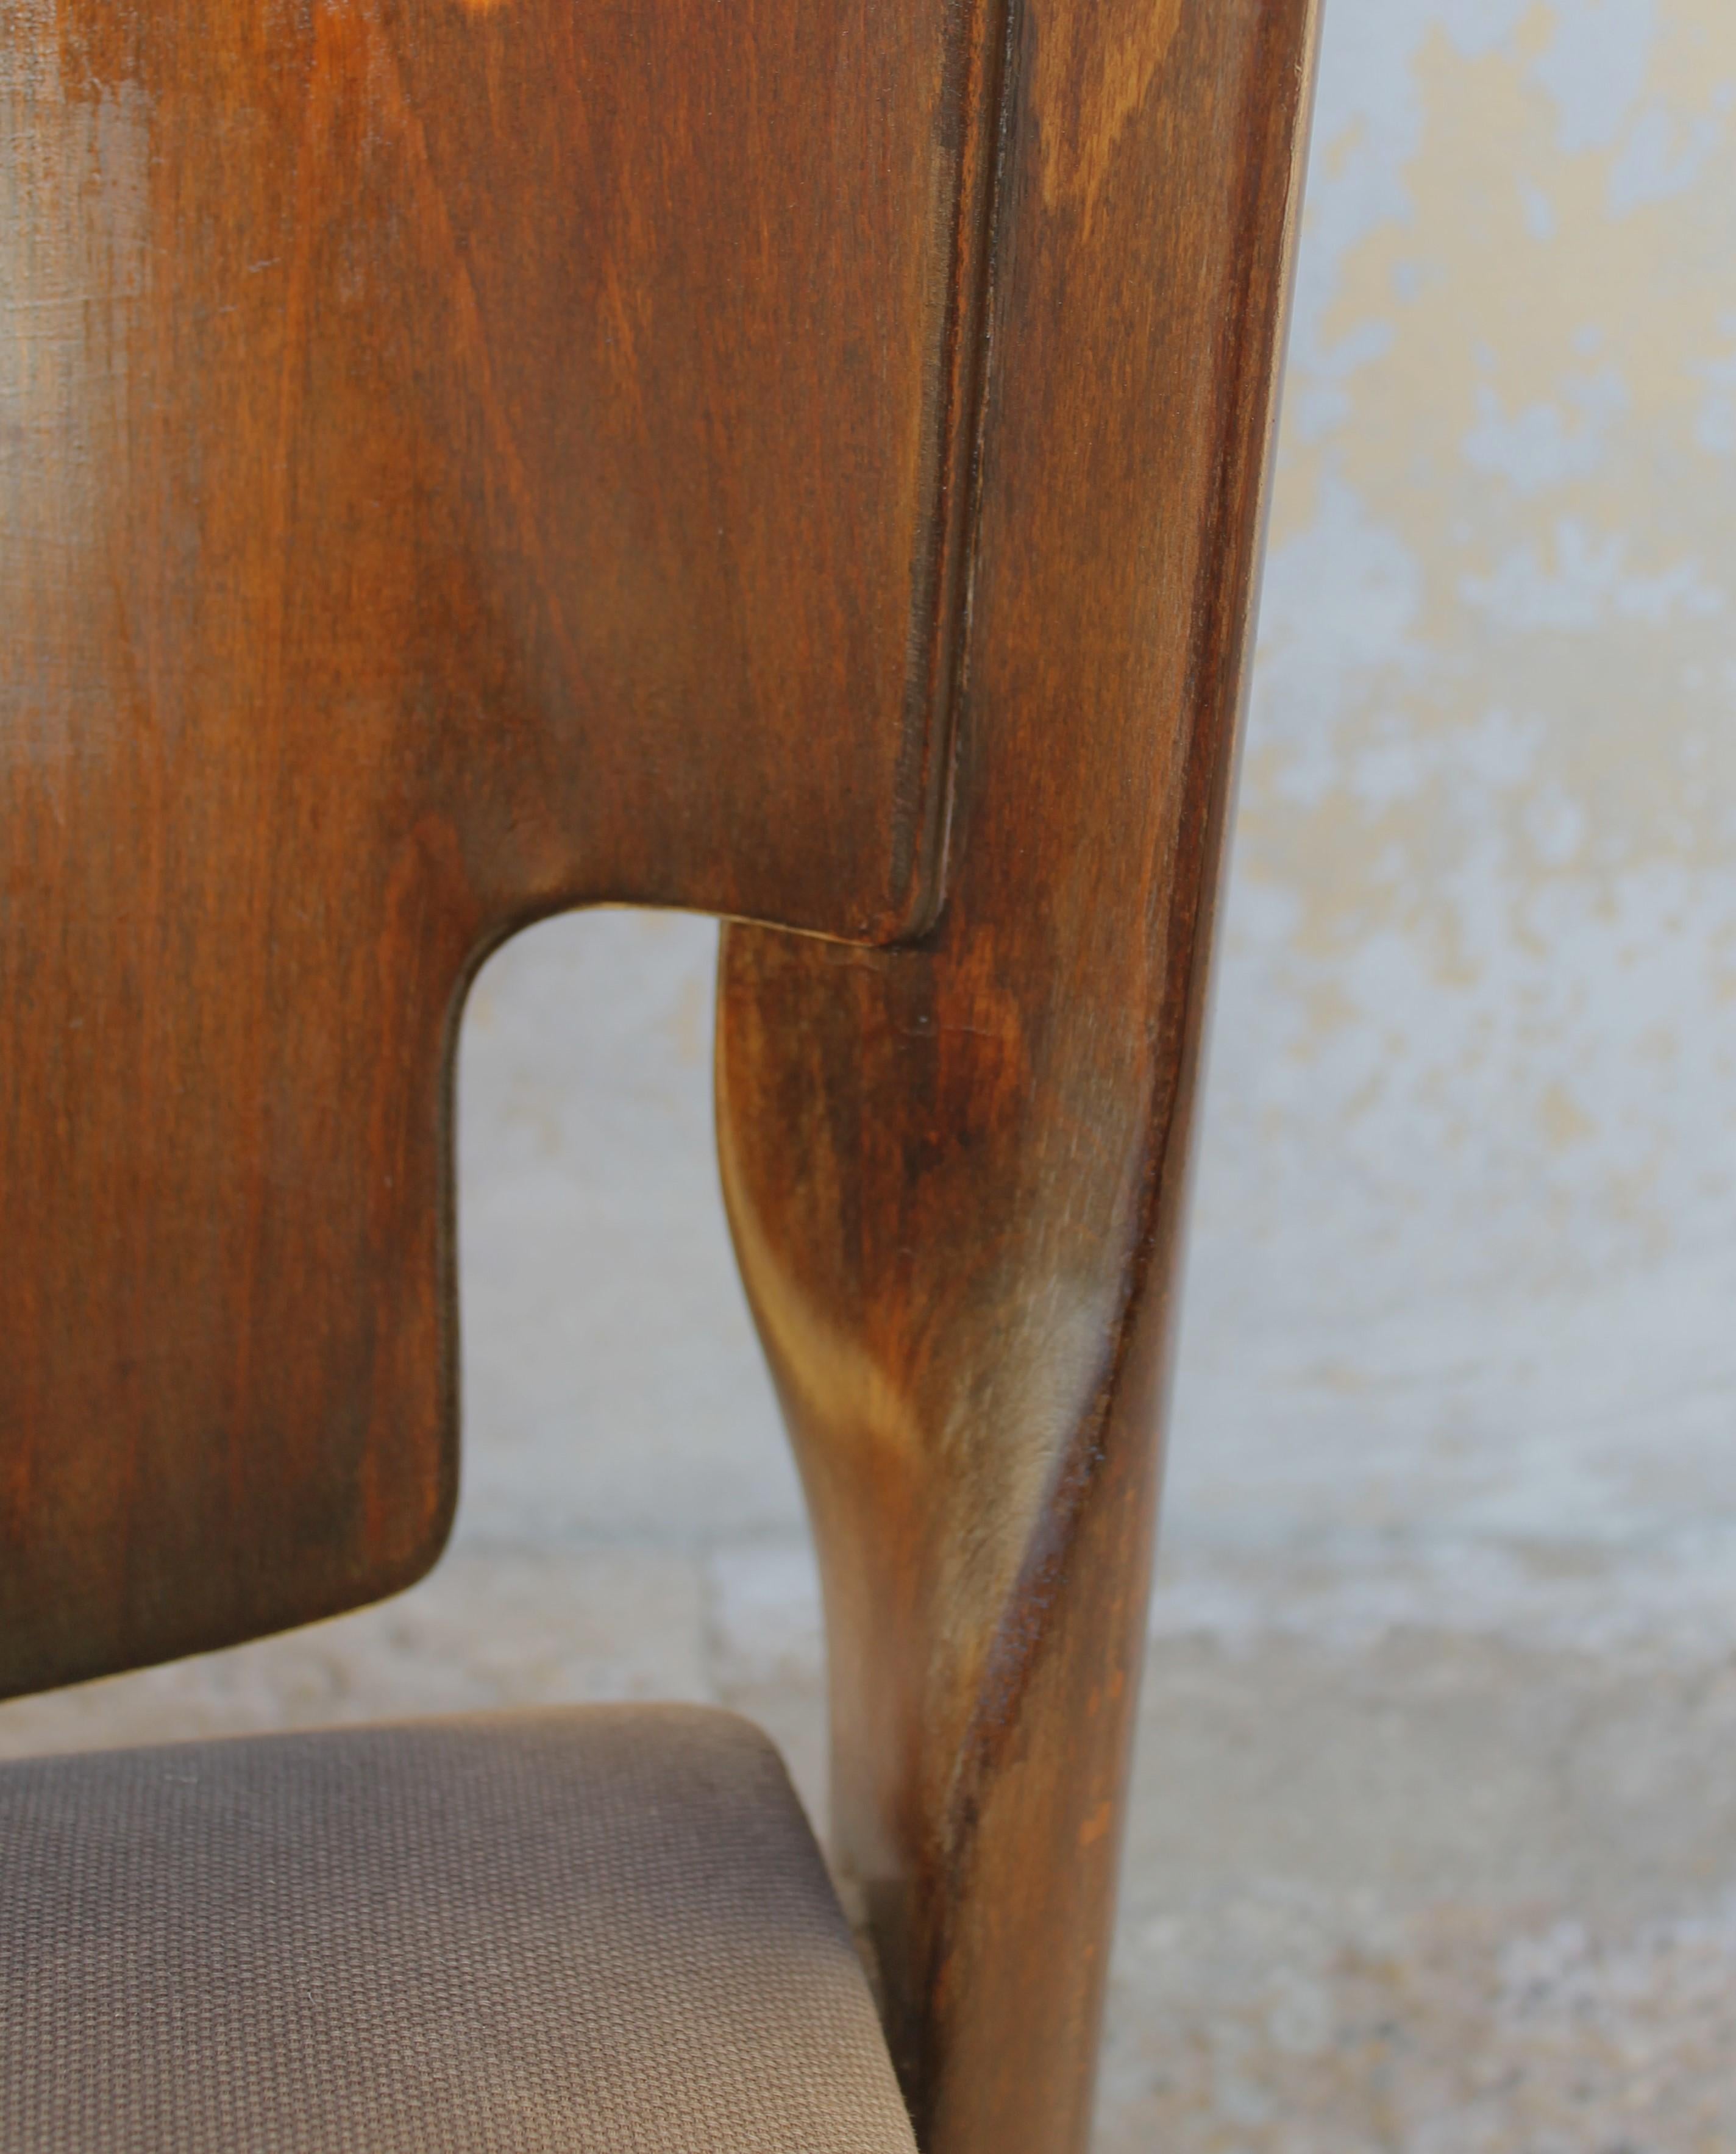  Cassina walnut chair Mod. 122 by Vico Magistretti Italy 60s (six available) In Good Condition For Sale In Sacile, PN